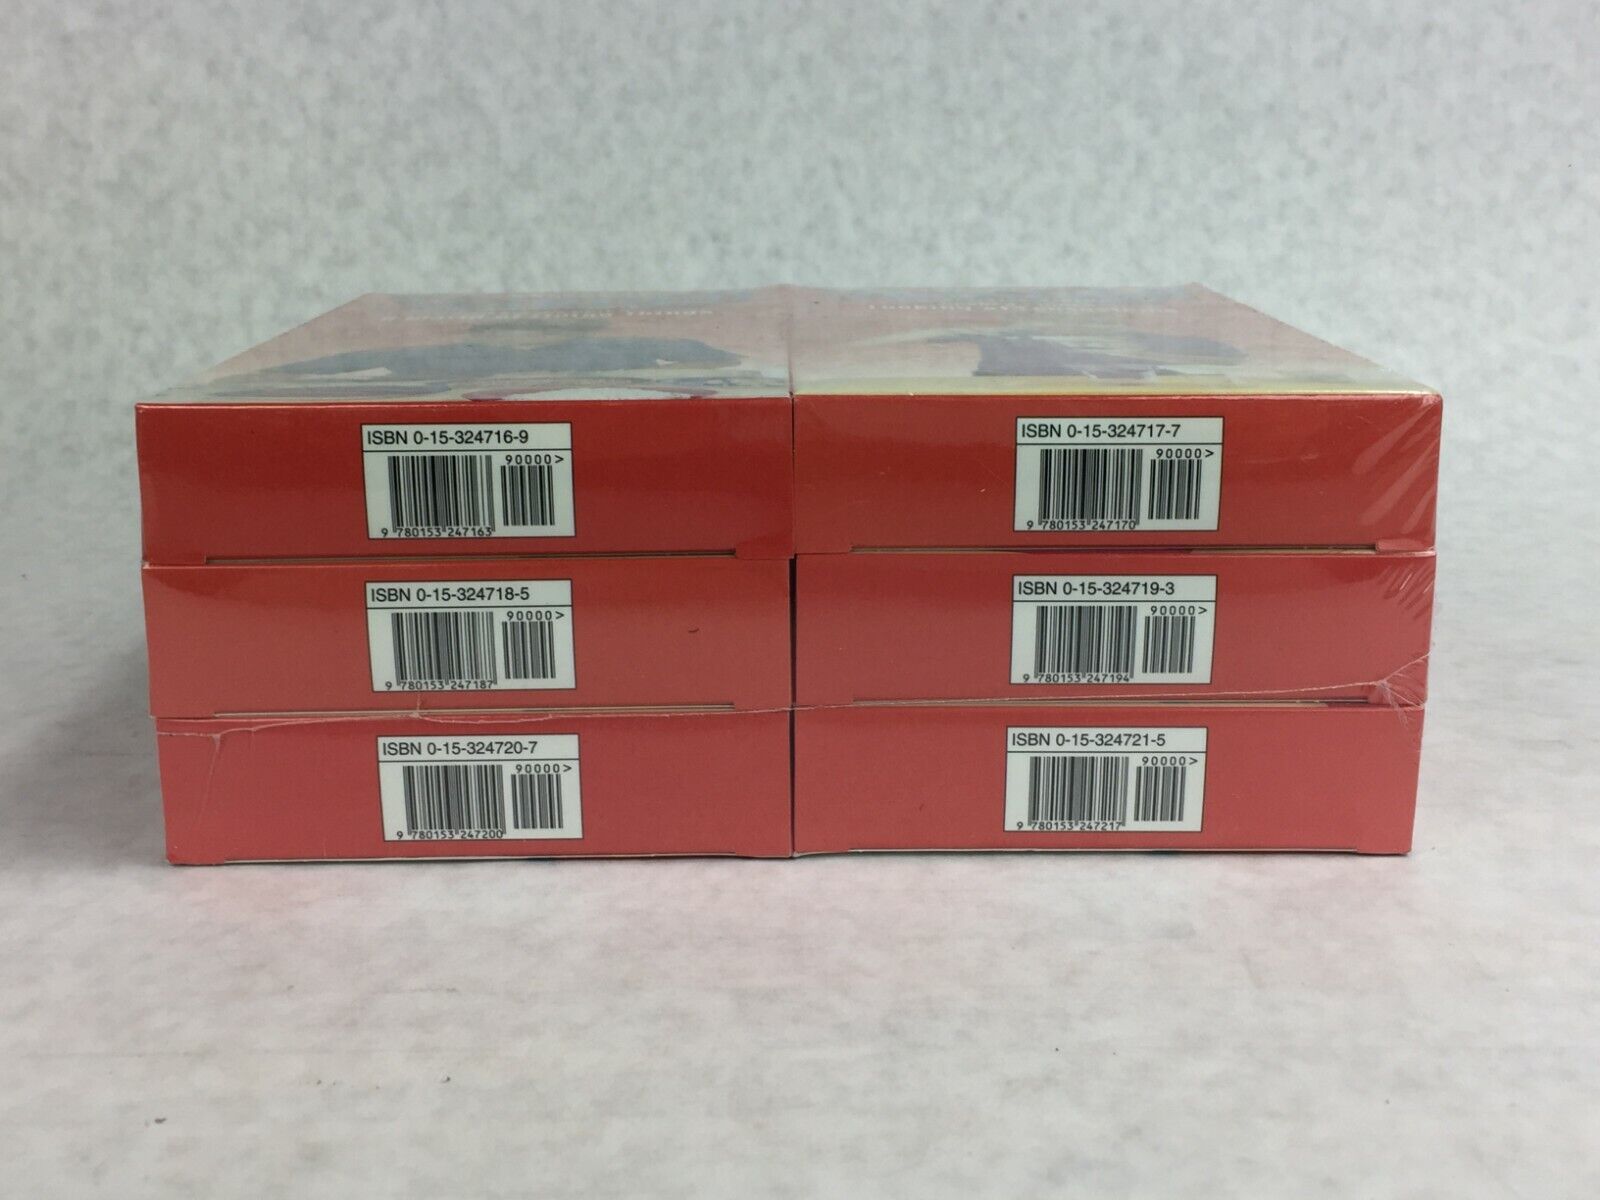 Harcourt Science Activity Videos Grade 4 Units A-F  Factory Sealed   6 VHS Tapes